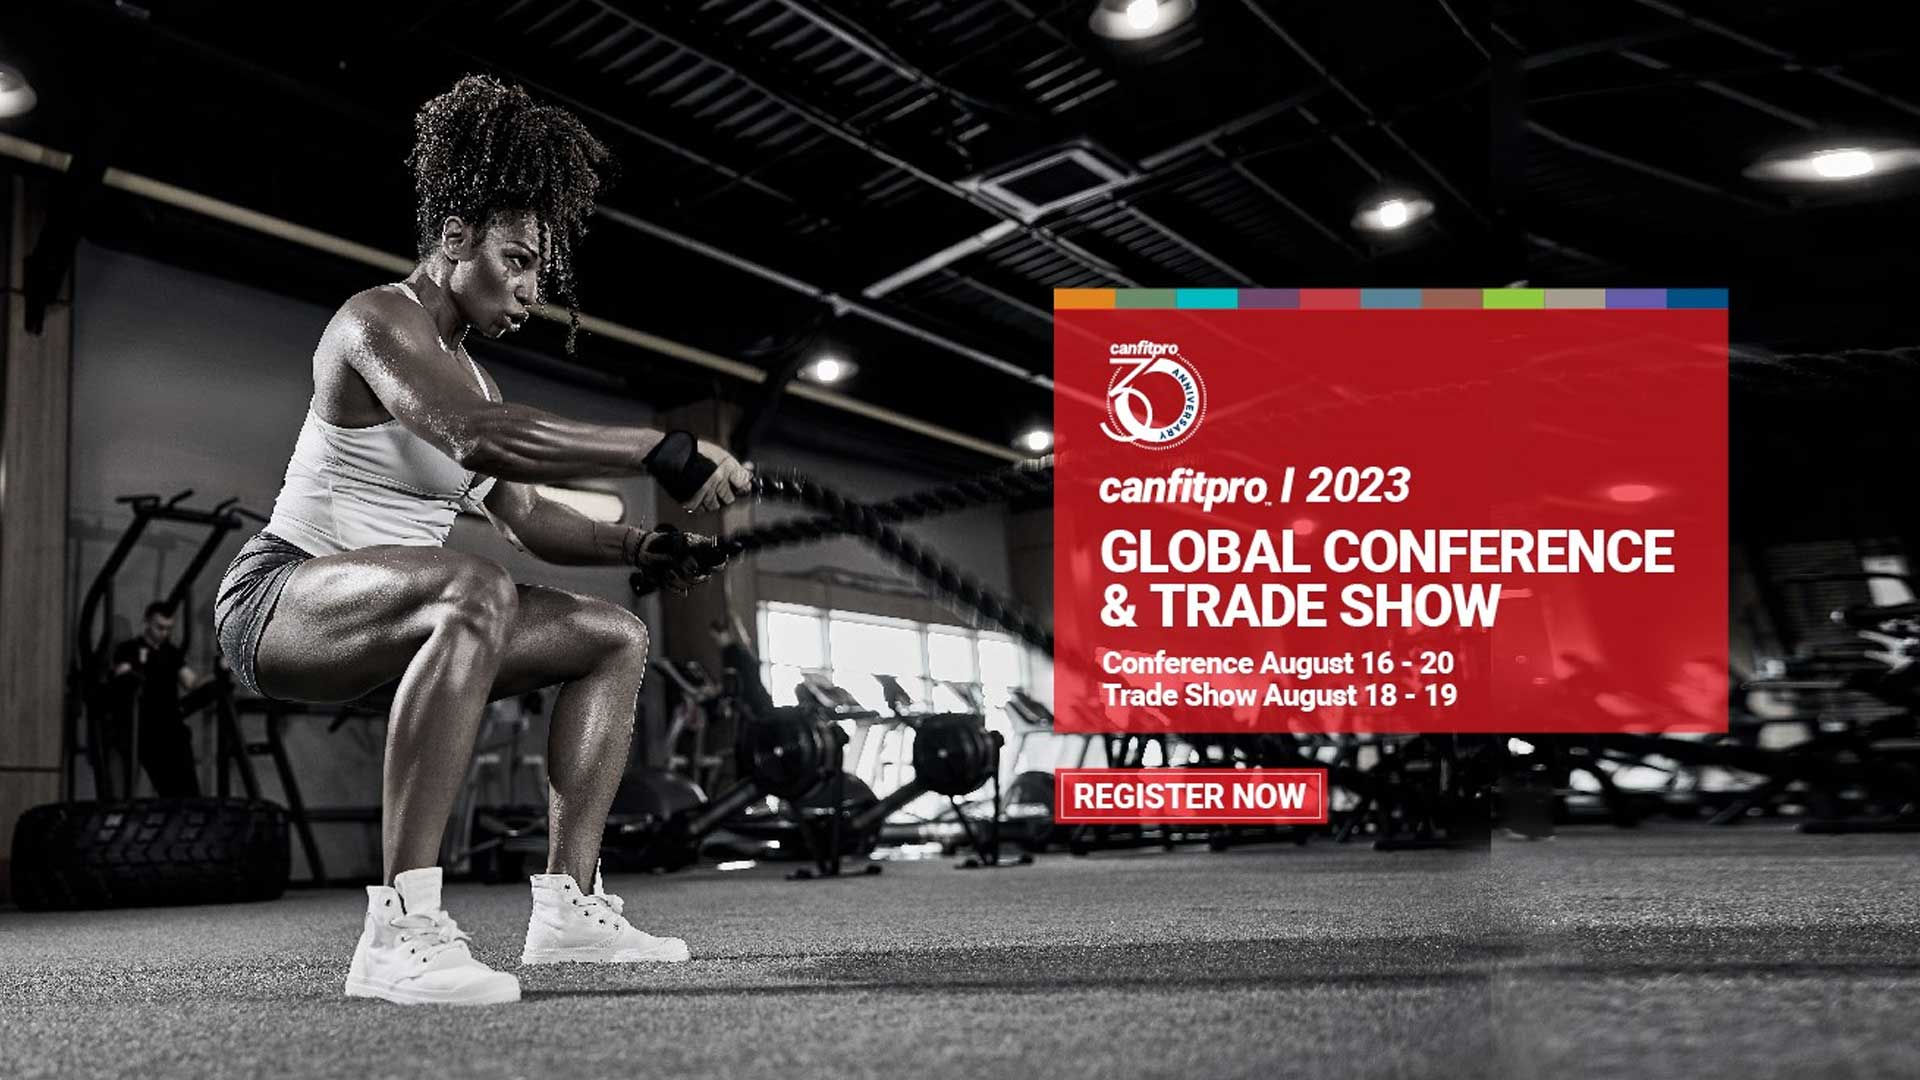 Canfitpro Global Trade Show & Conference